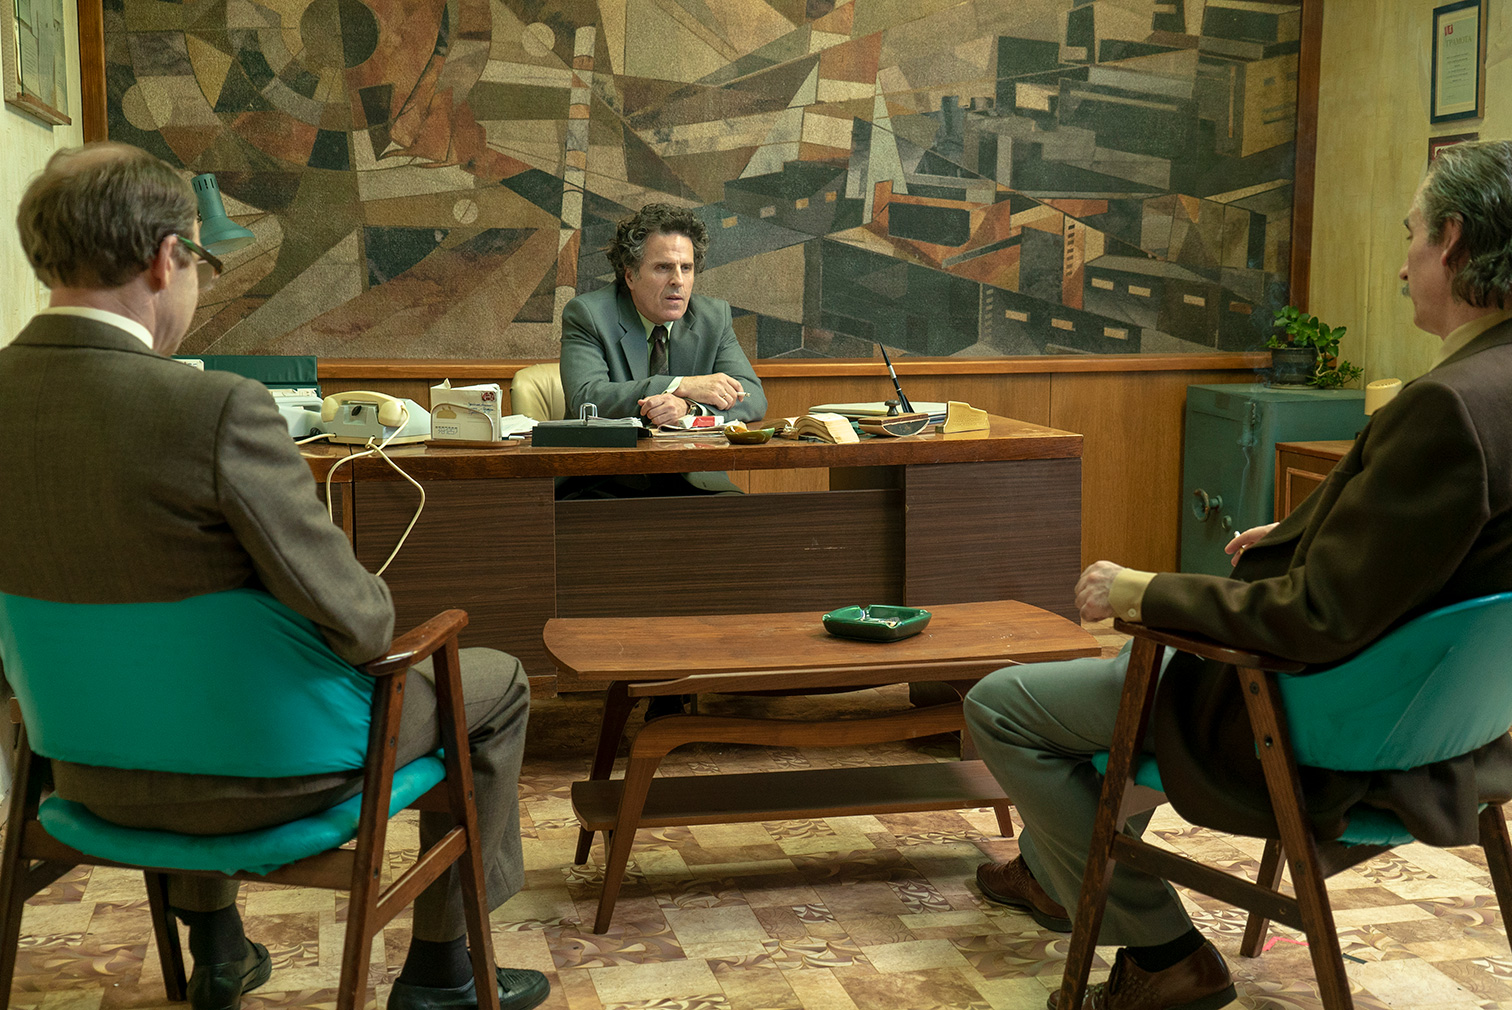 Chernobyl's interior sets evoke the 1980s with myriad clashing patterns and somber tones